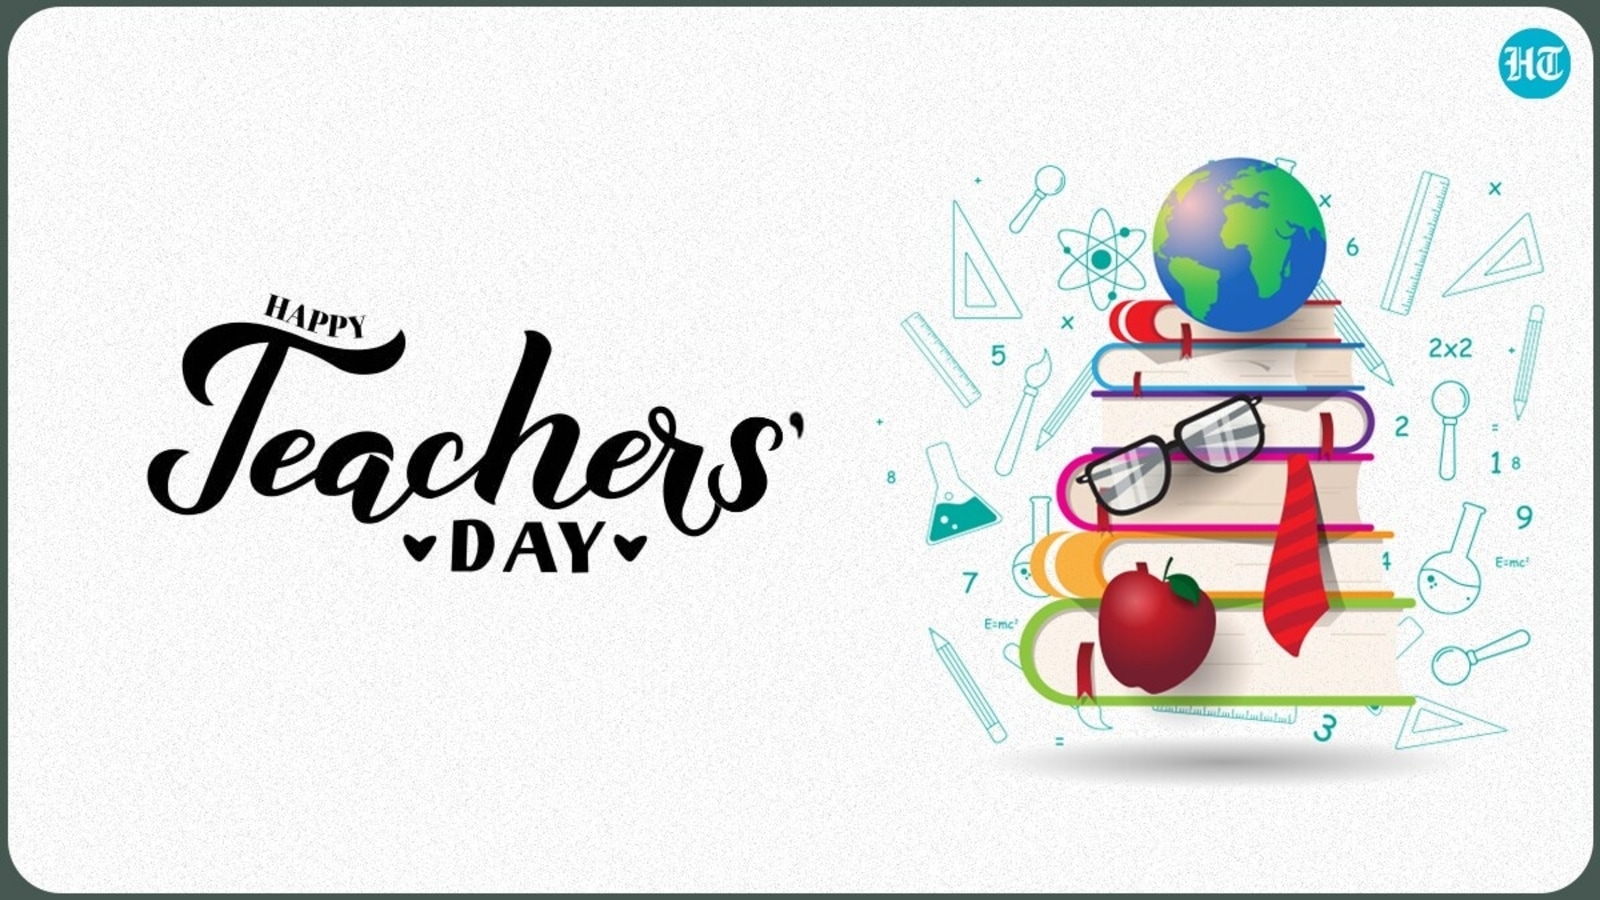 Happy Teachers' Day Wishes, quotes, images, messages to celebrate your